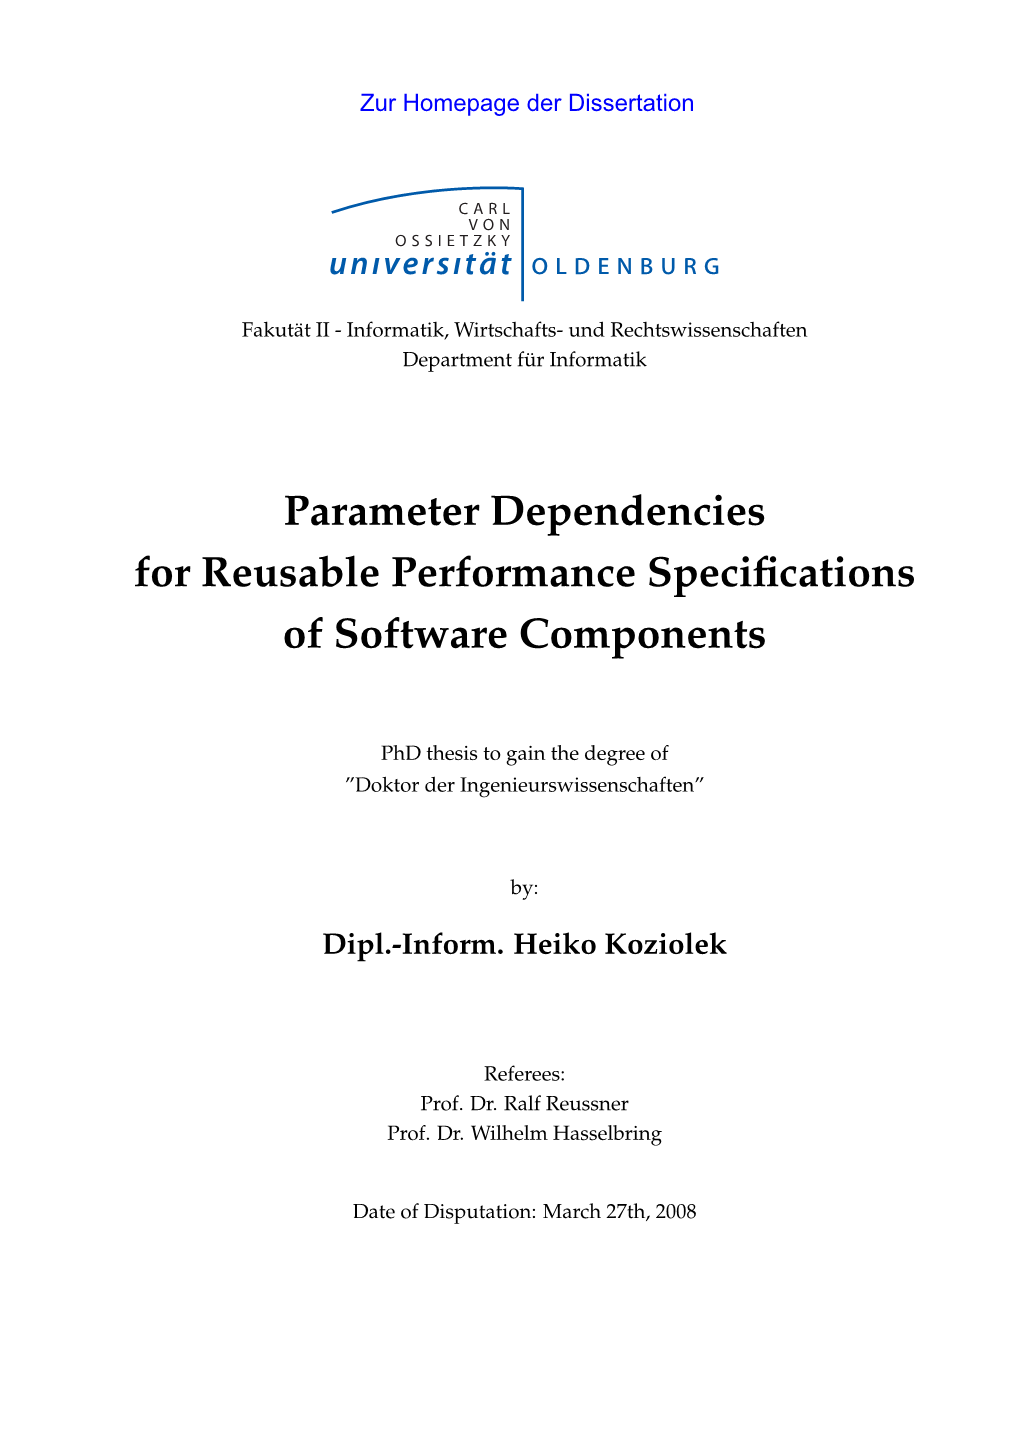 Parameter Dependencies for Reusable Performance Speciﬁcations of Software Components